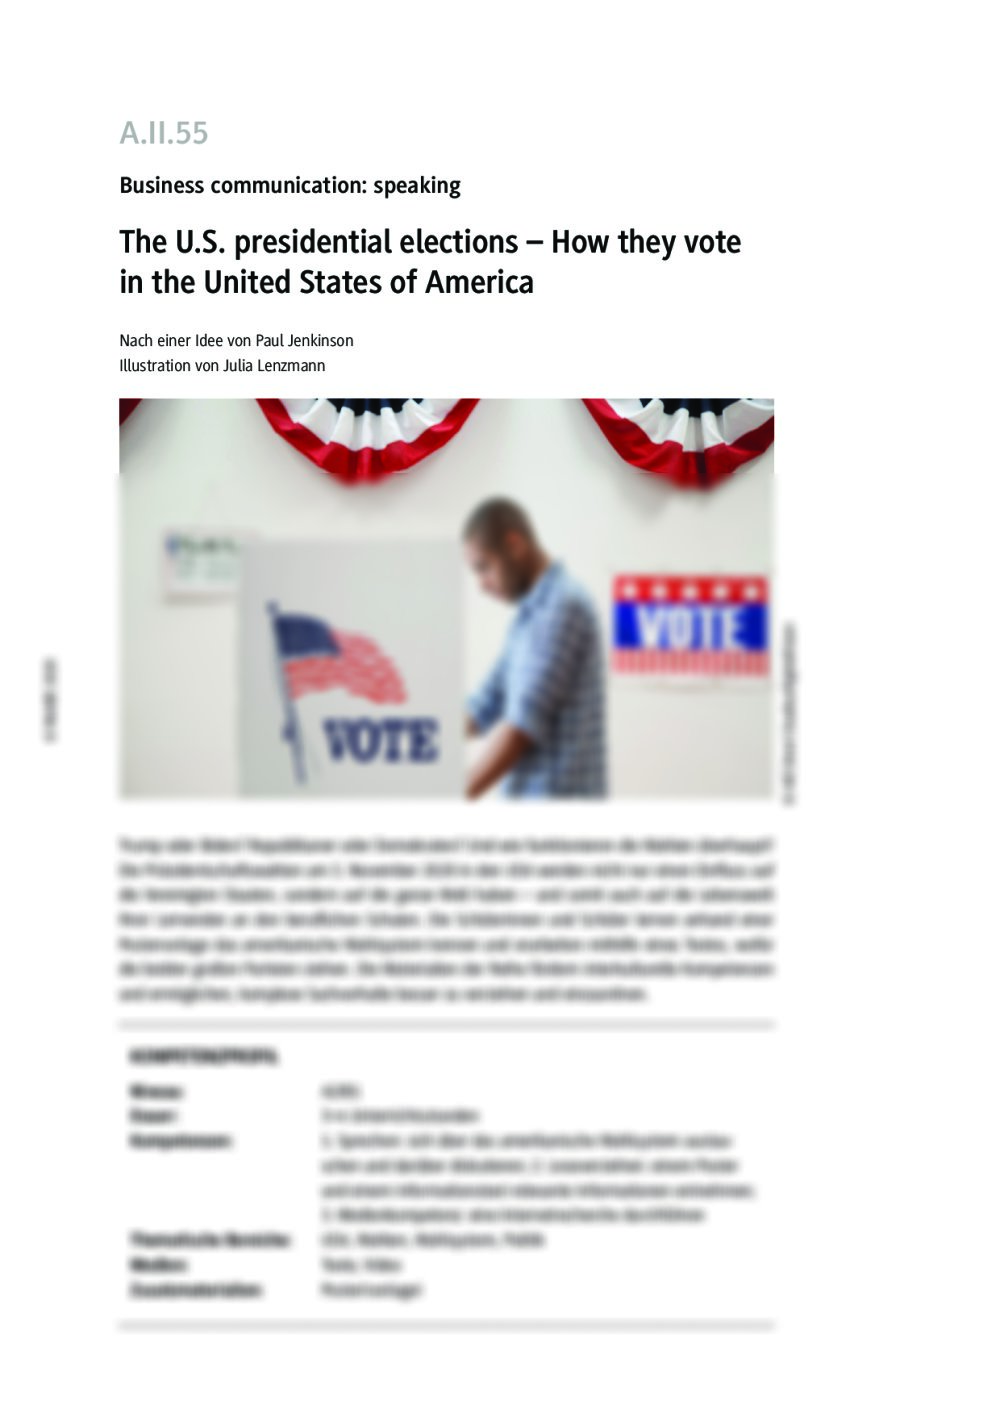 The U.S. presidential elections - Seite 1